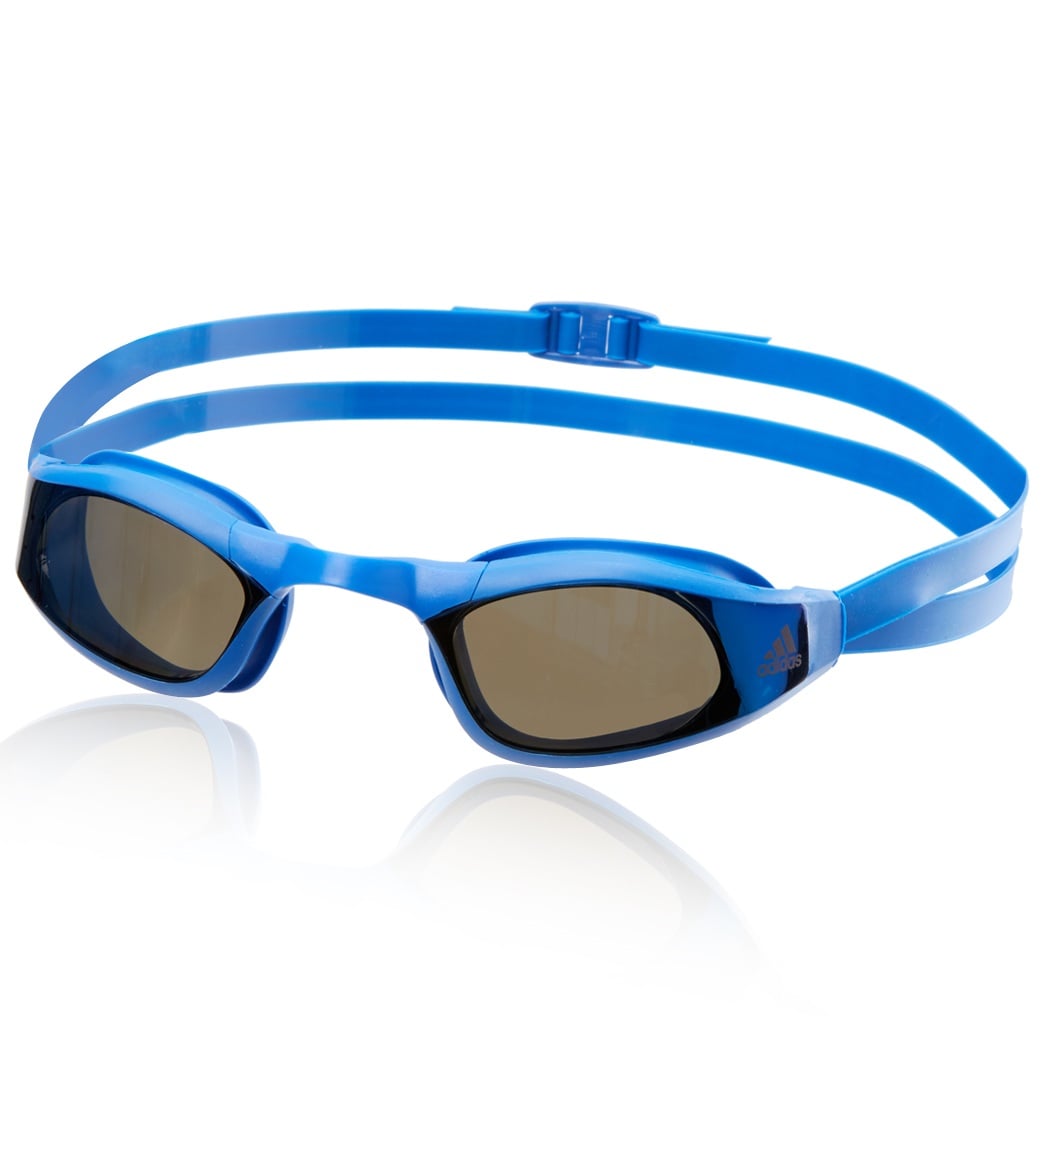 Adidas Persistar Race Mirrored Goggle at SwimOutlet.com